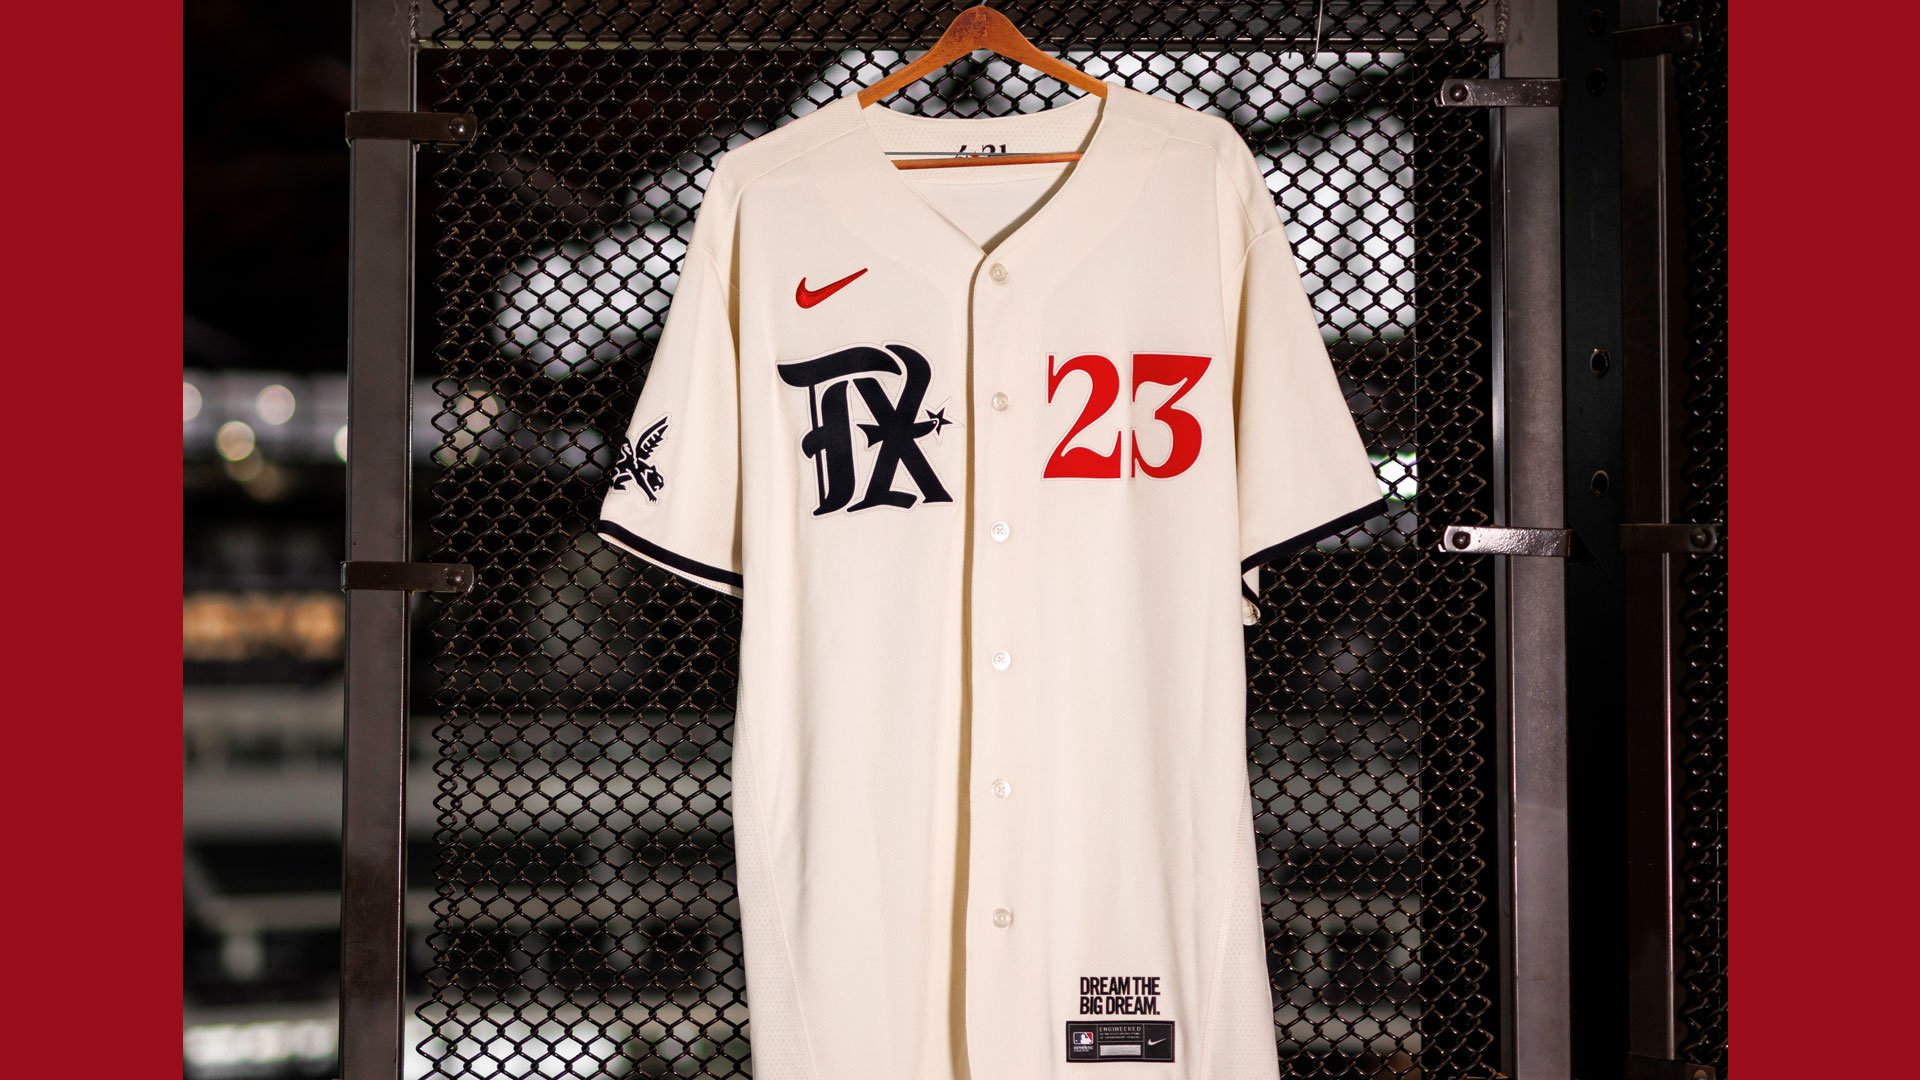 mlb new uniforms for 2023